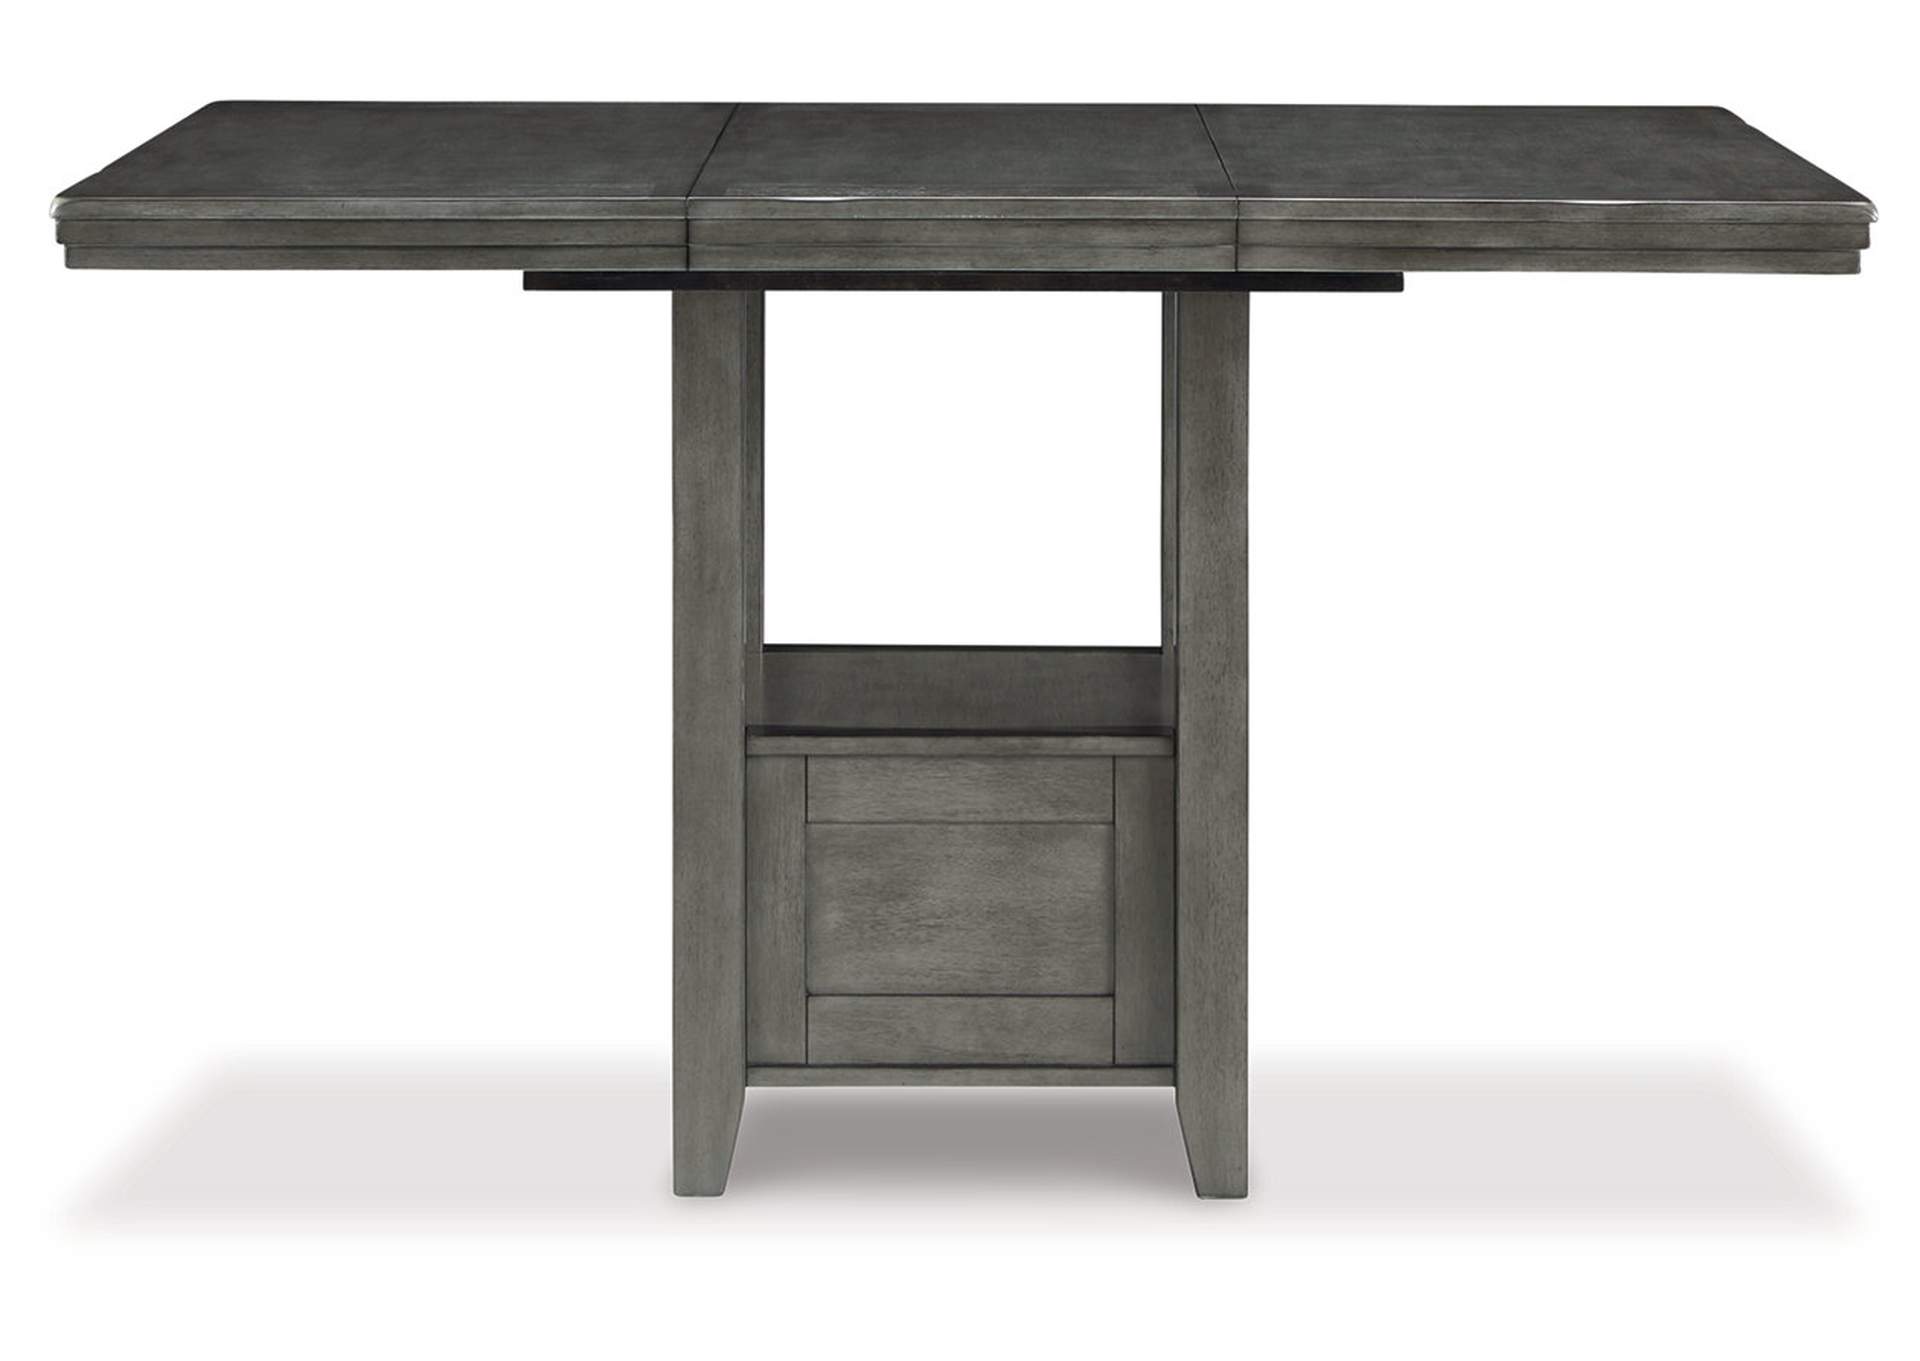 Hallanden Counter Height Dining Table and 4 Barstools with Storage,Signature Design By Ashley